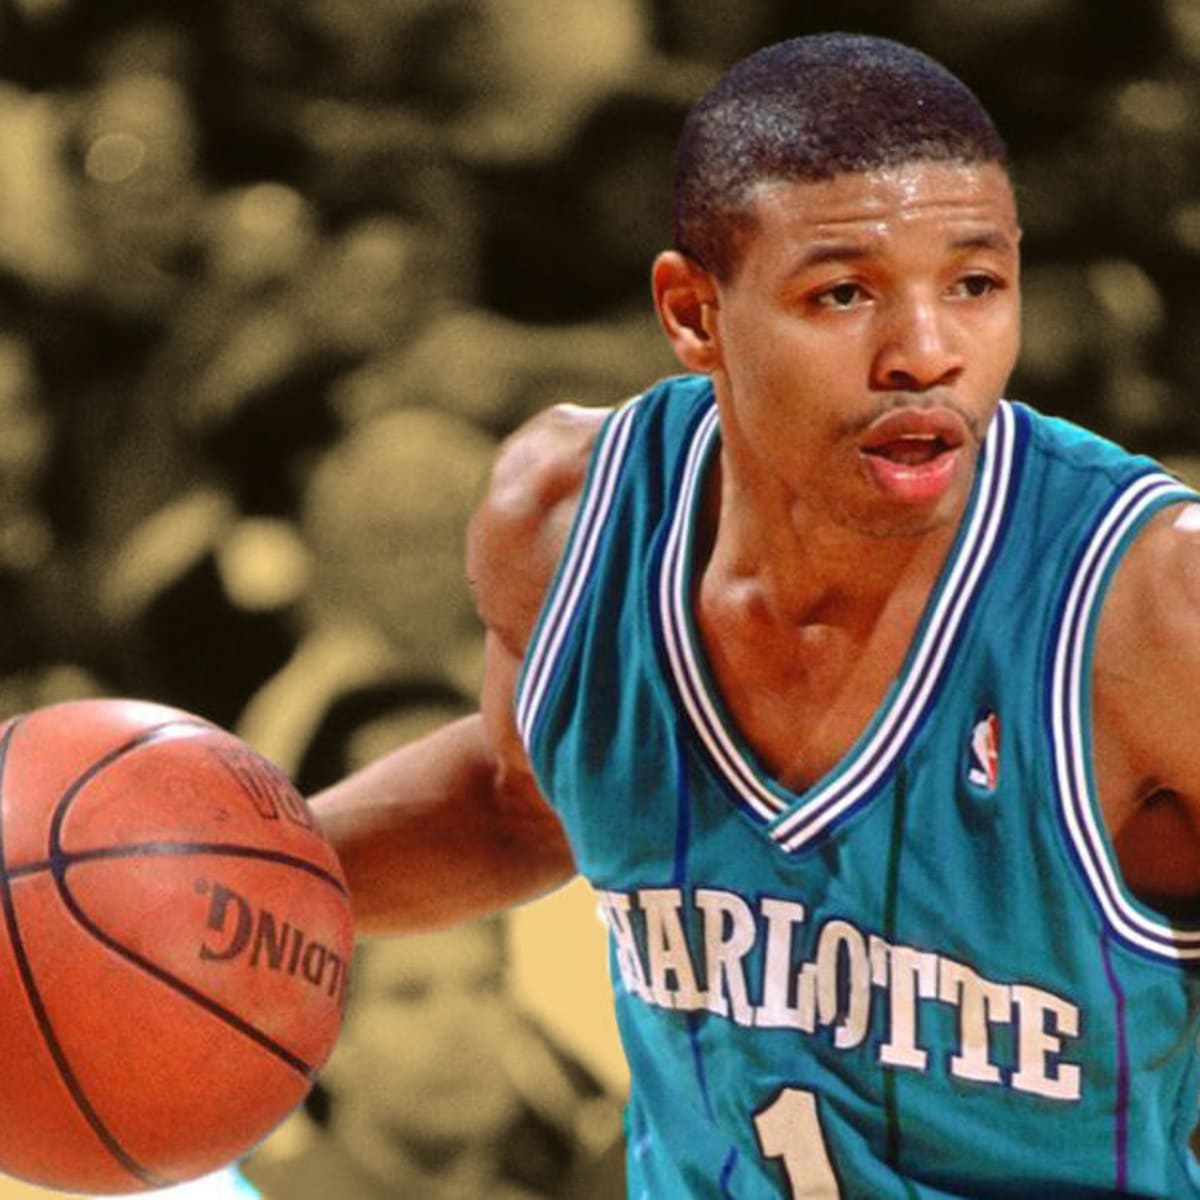 I'm Muggsy Bogues, former Starting Point Guard for the Charlotte